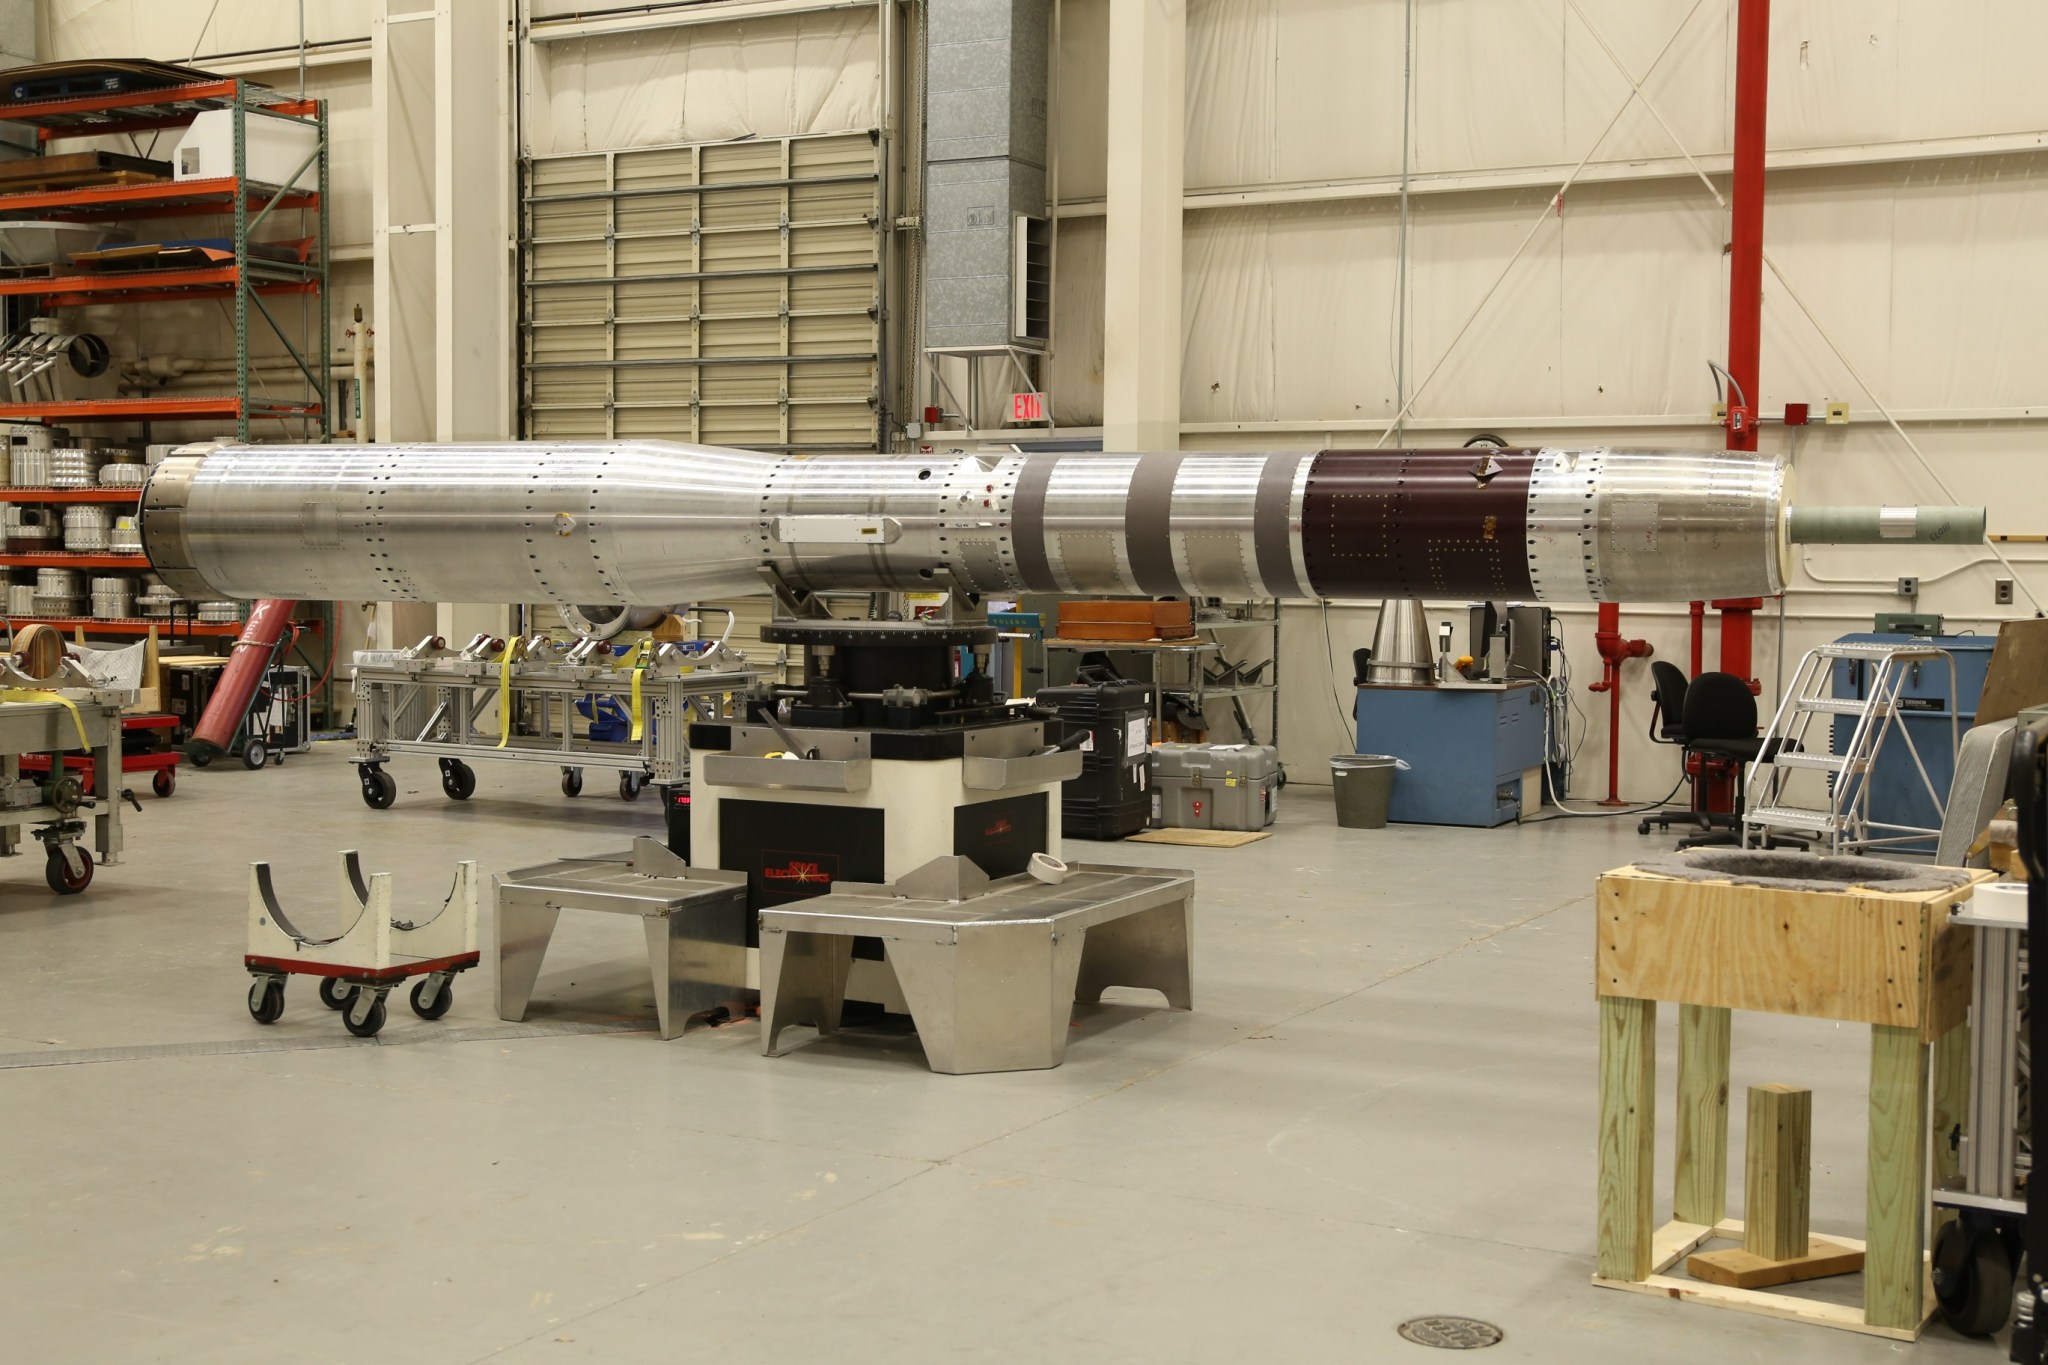 A long, metal payload section of a sounding rocket is set on a metal stand inside a large clean room with other various pieces of sounding rocket parts around.